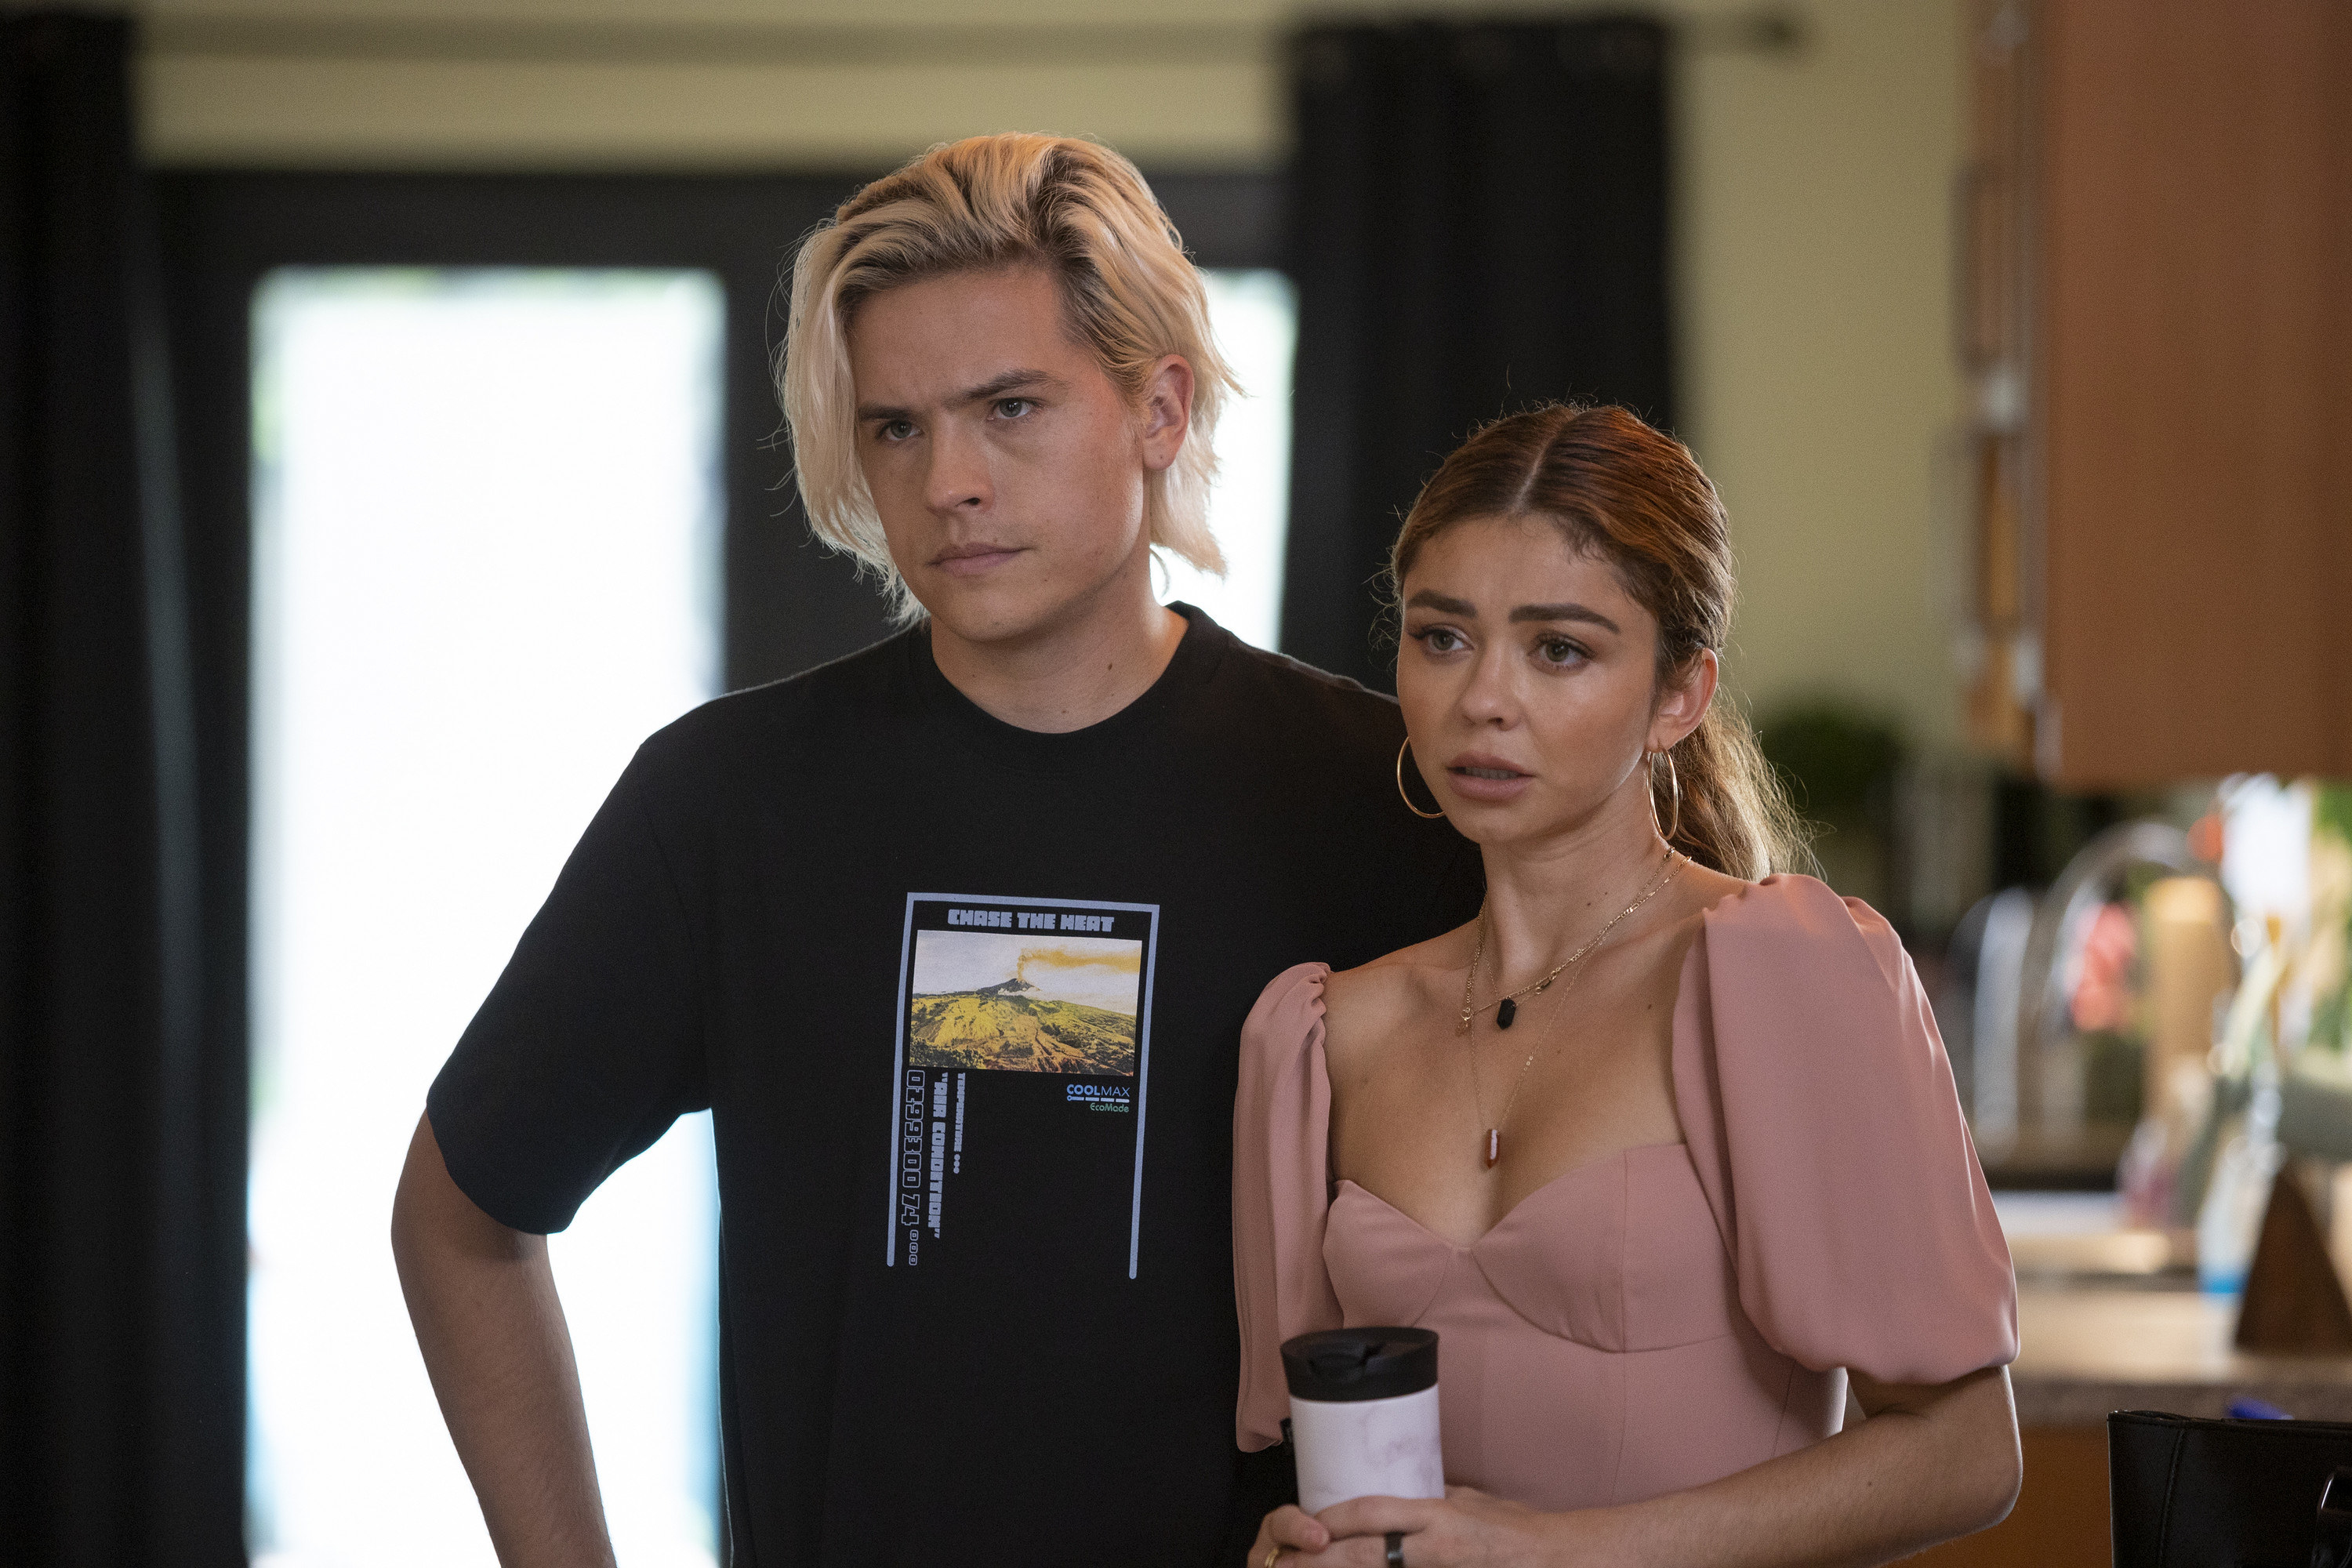 Dylan Sprouse and Sarah Hyland stand together